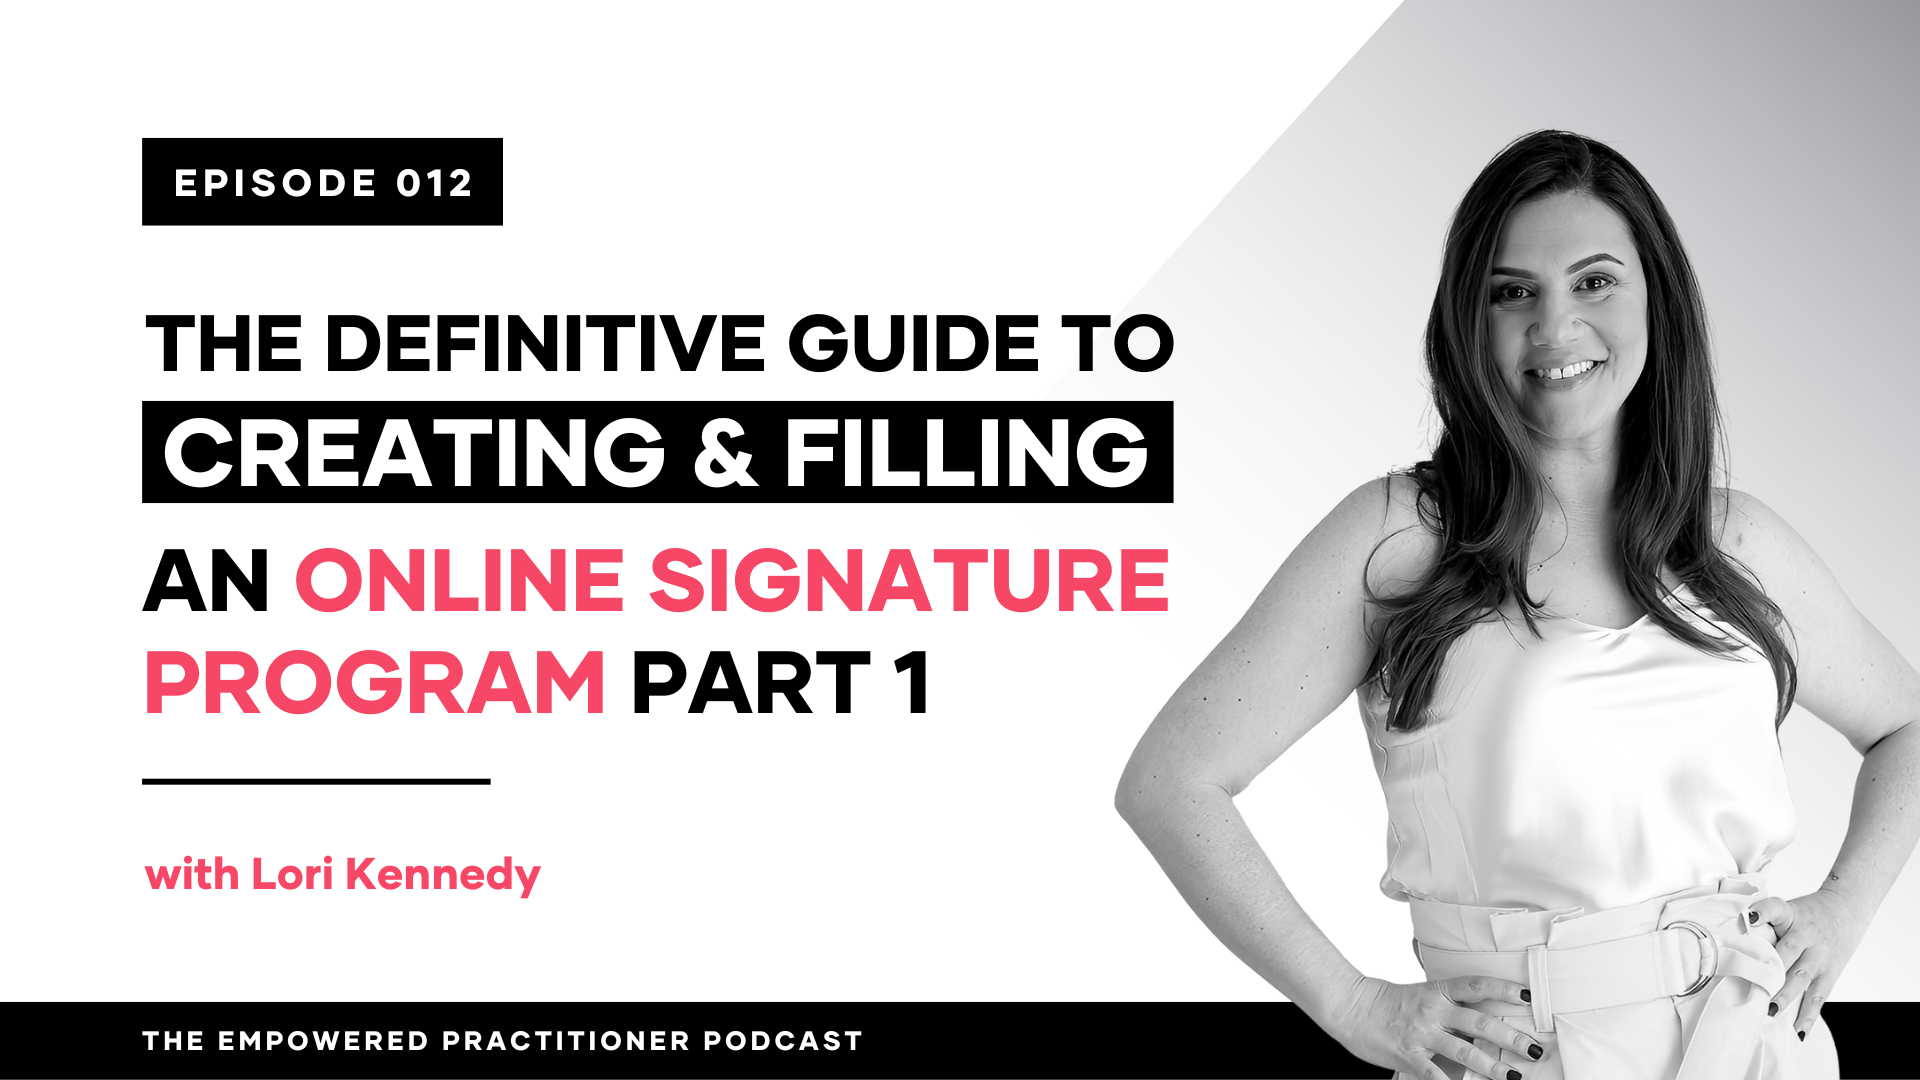 The Definitive Guide To Creating & Filling An Online Signature Program Part 1